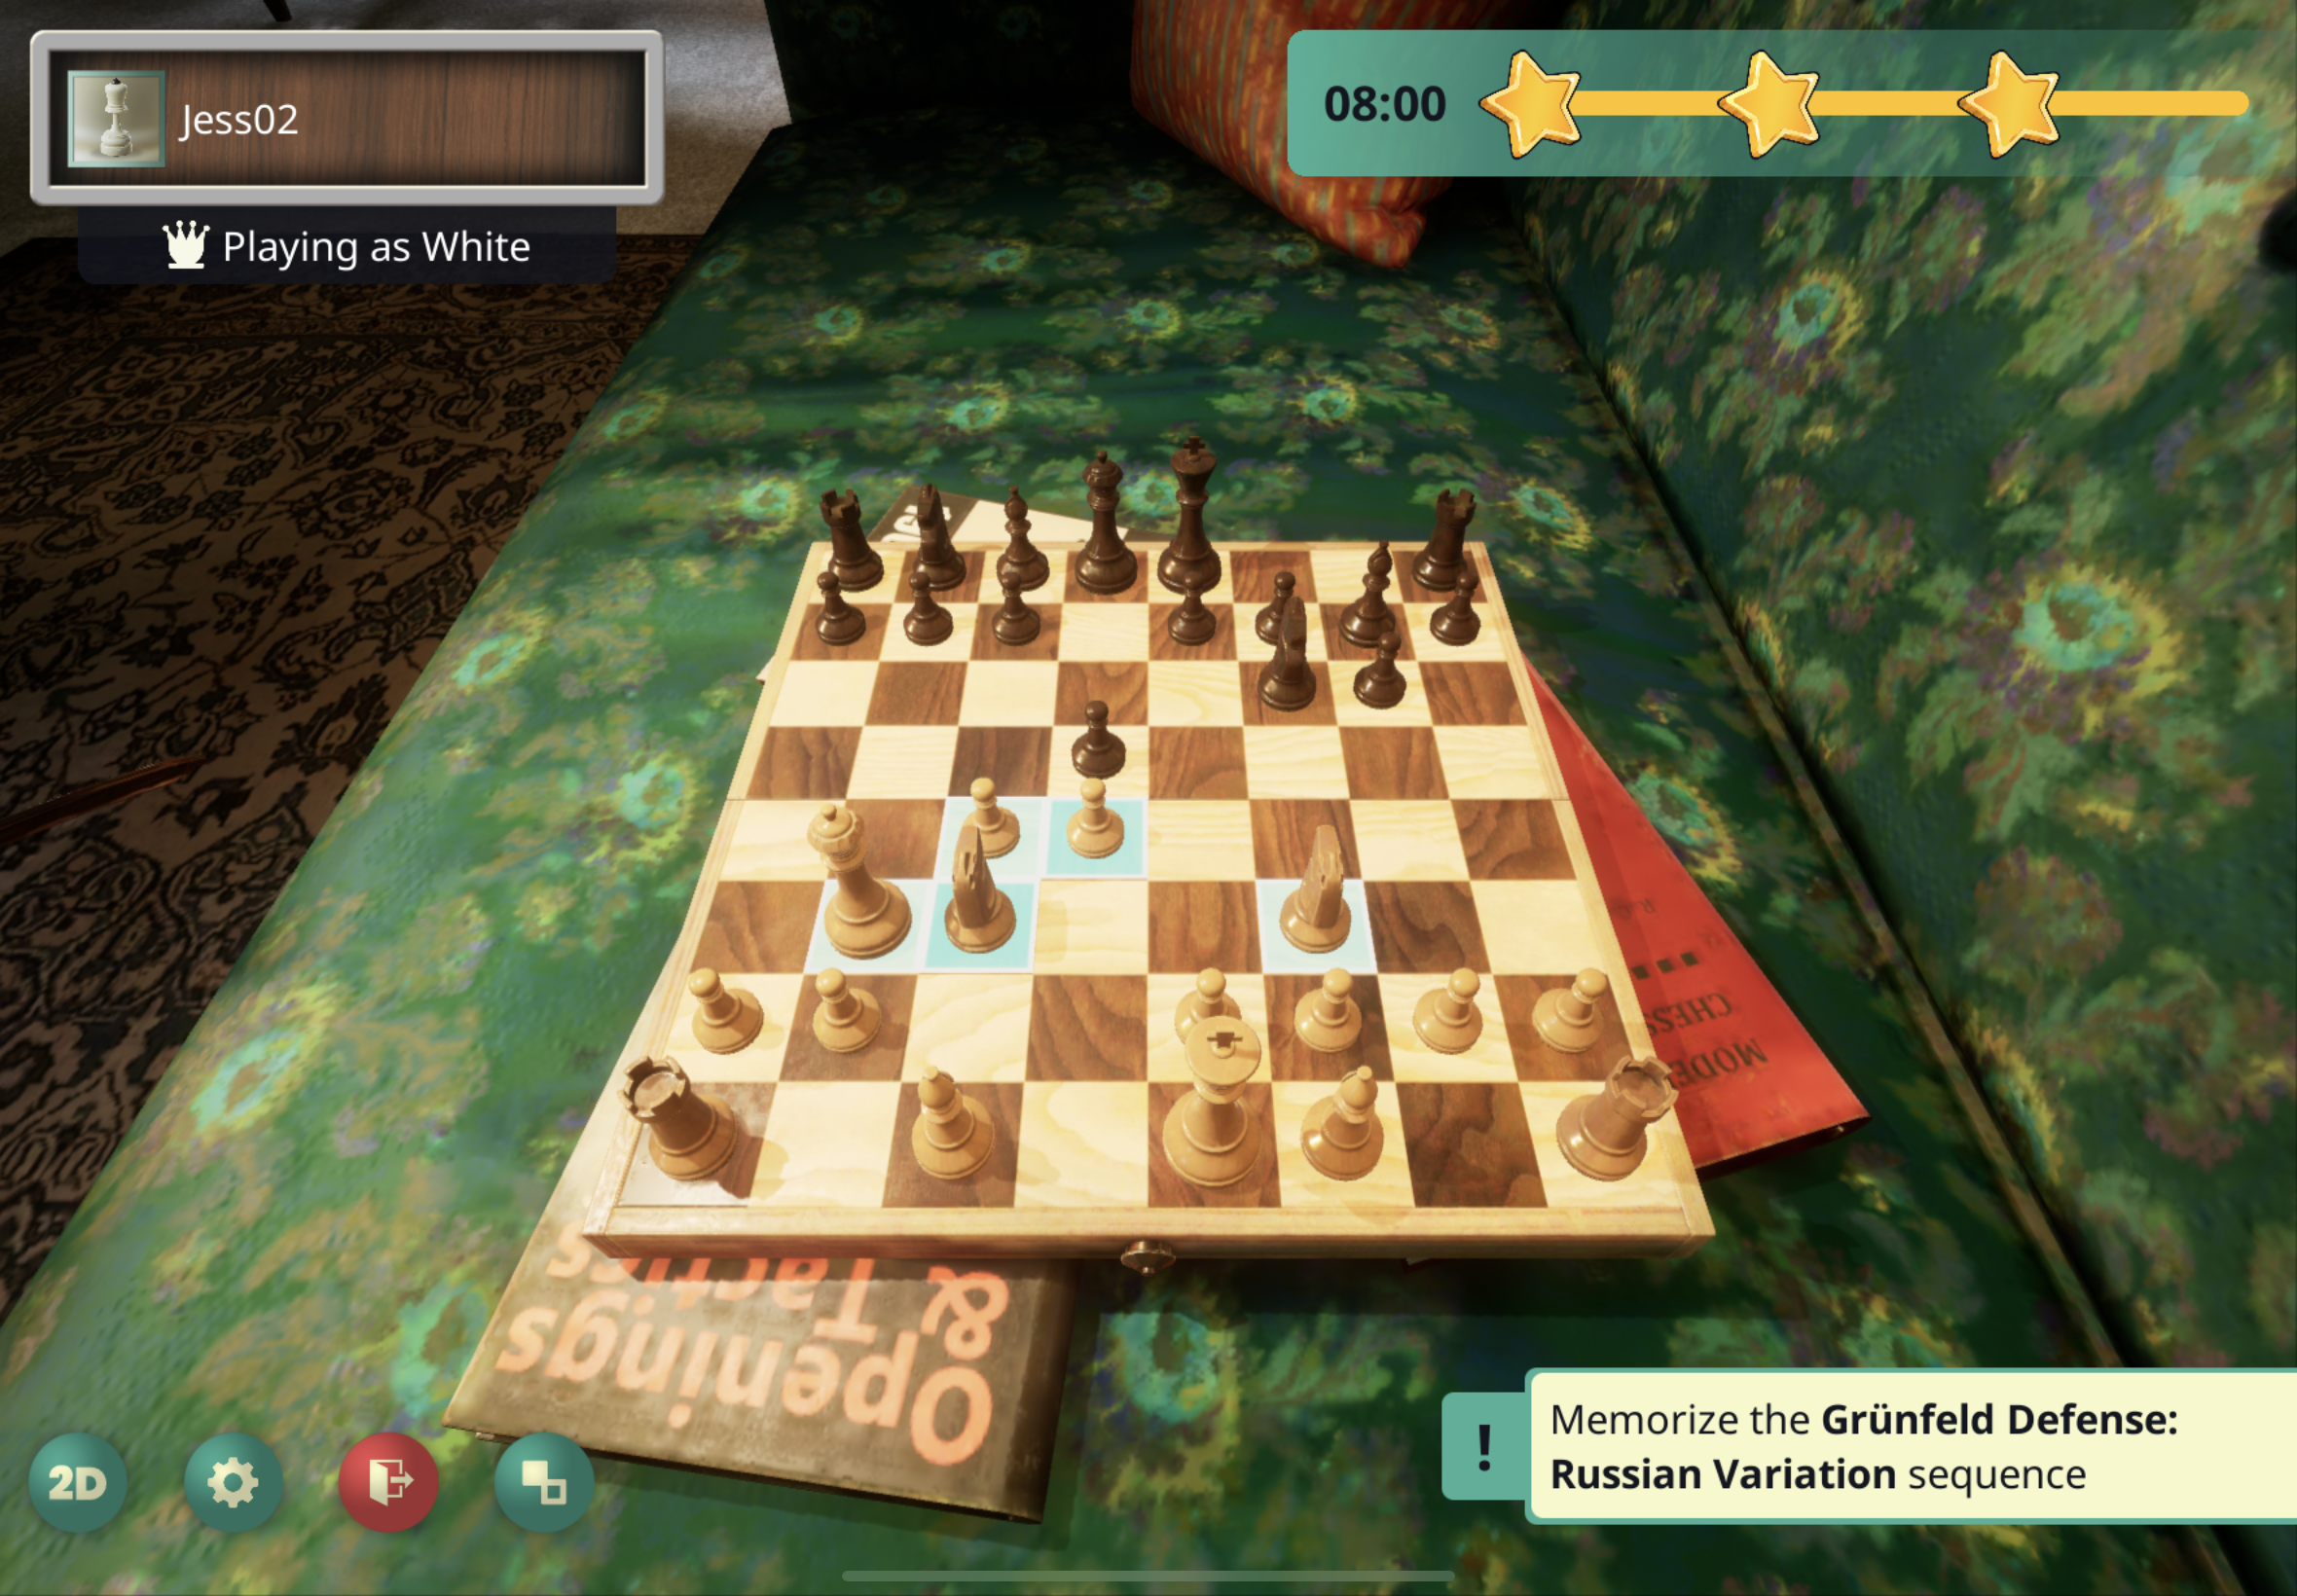 The Queen's Gambit: Epic Netflix chess series is addictive, Reviews